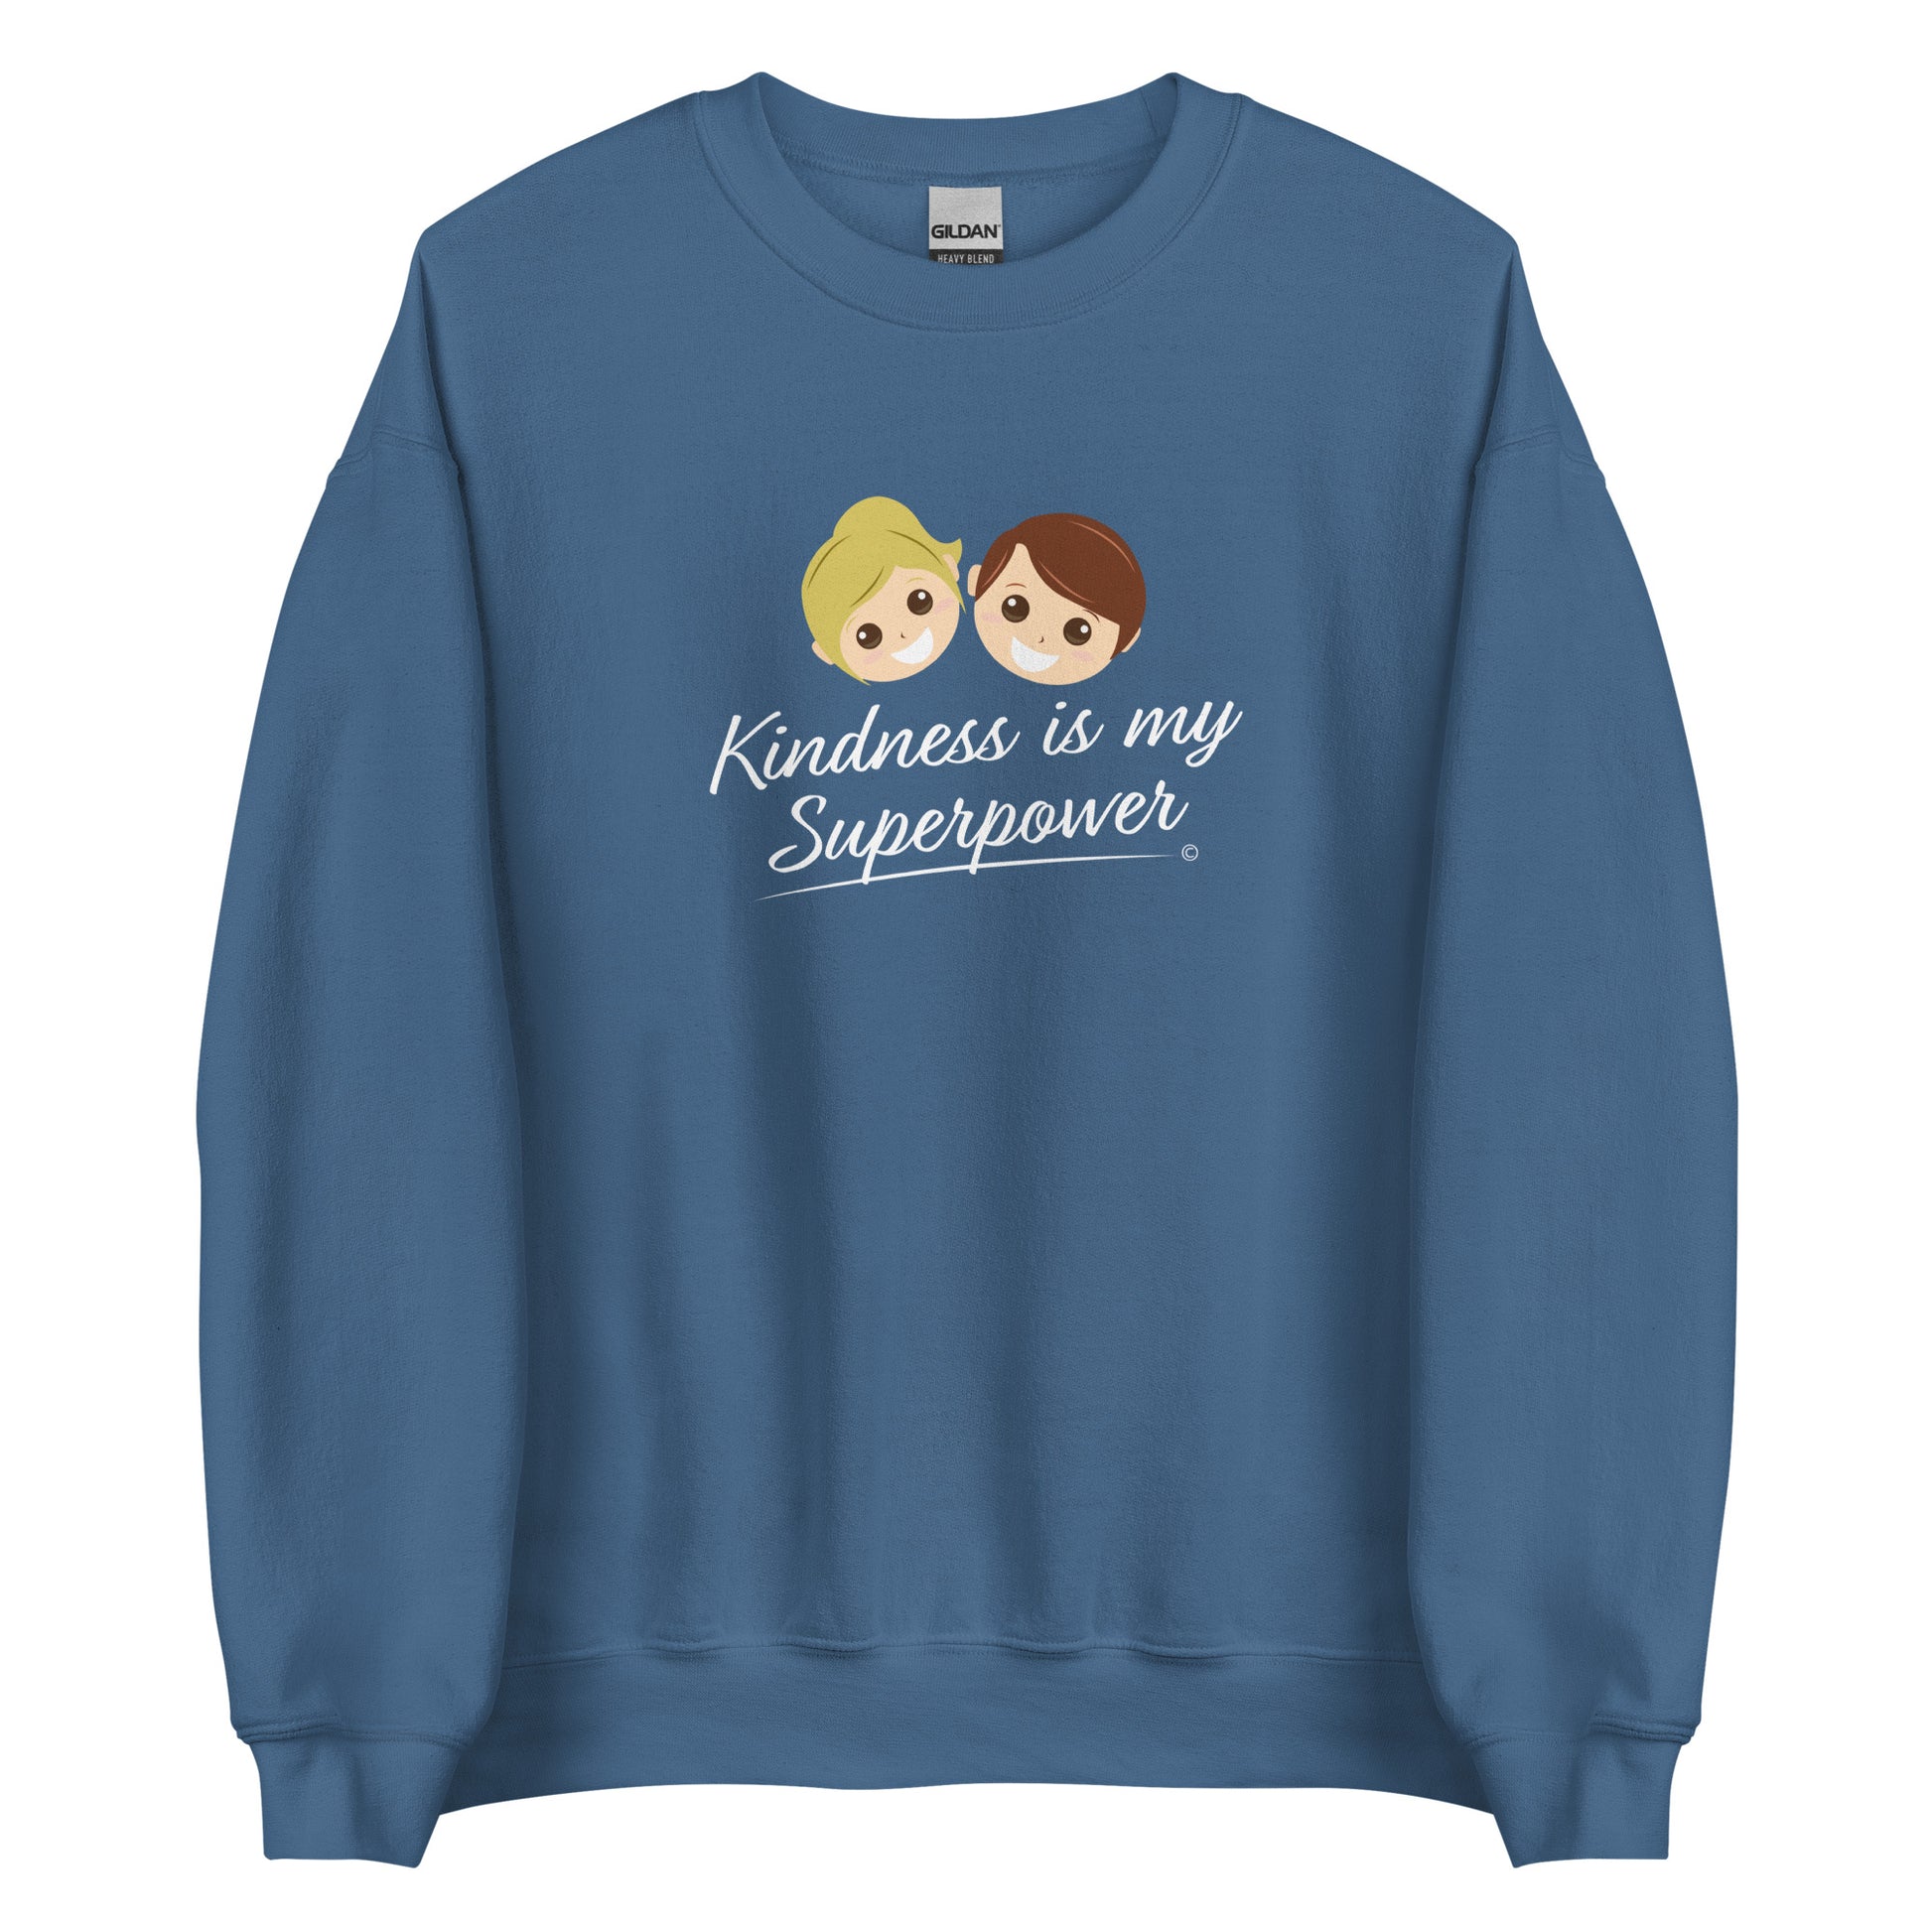 A cozy unisex sweatshirt in indigo blue featuring the uplifting quote 'Kindness is my Superpower' in bold lettering.